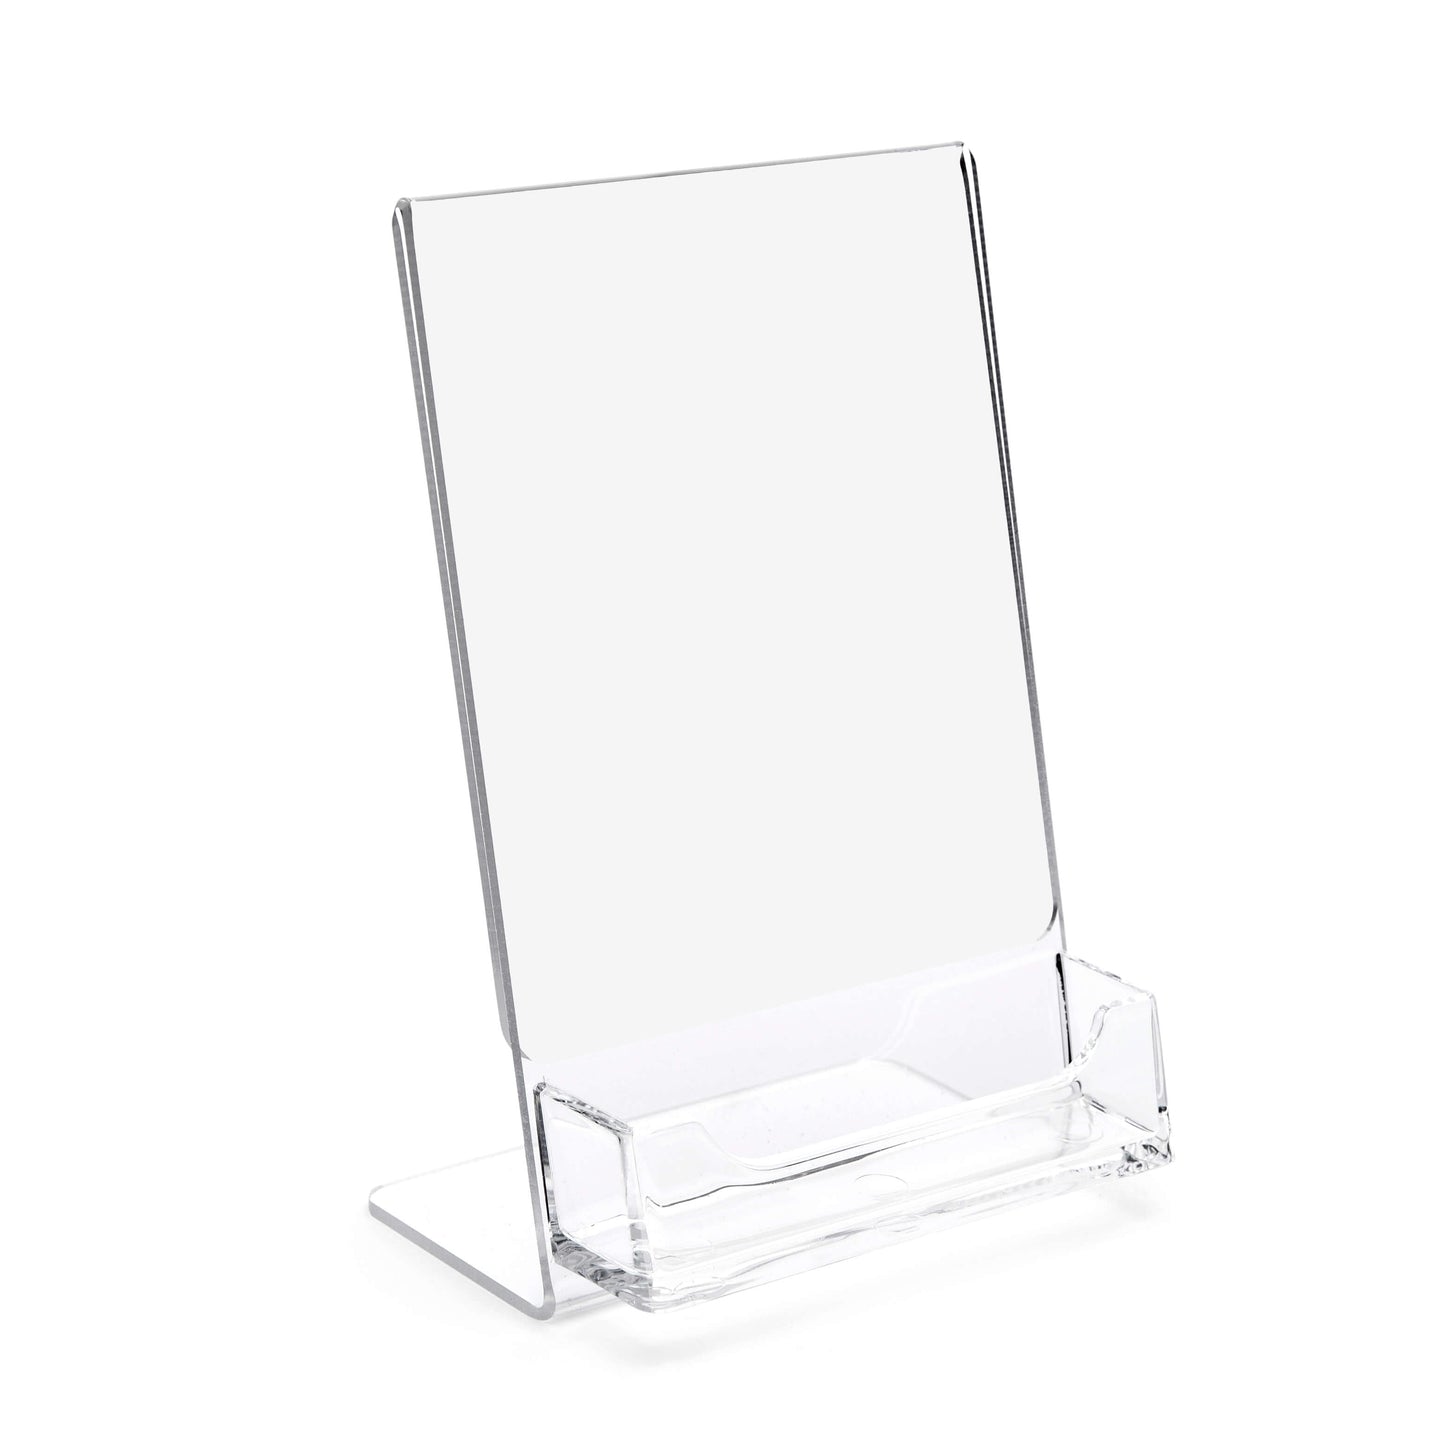 Acrylic Sign Holder with Card Pocket